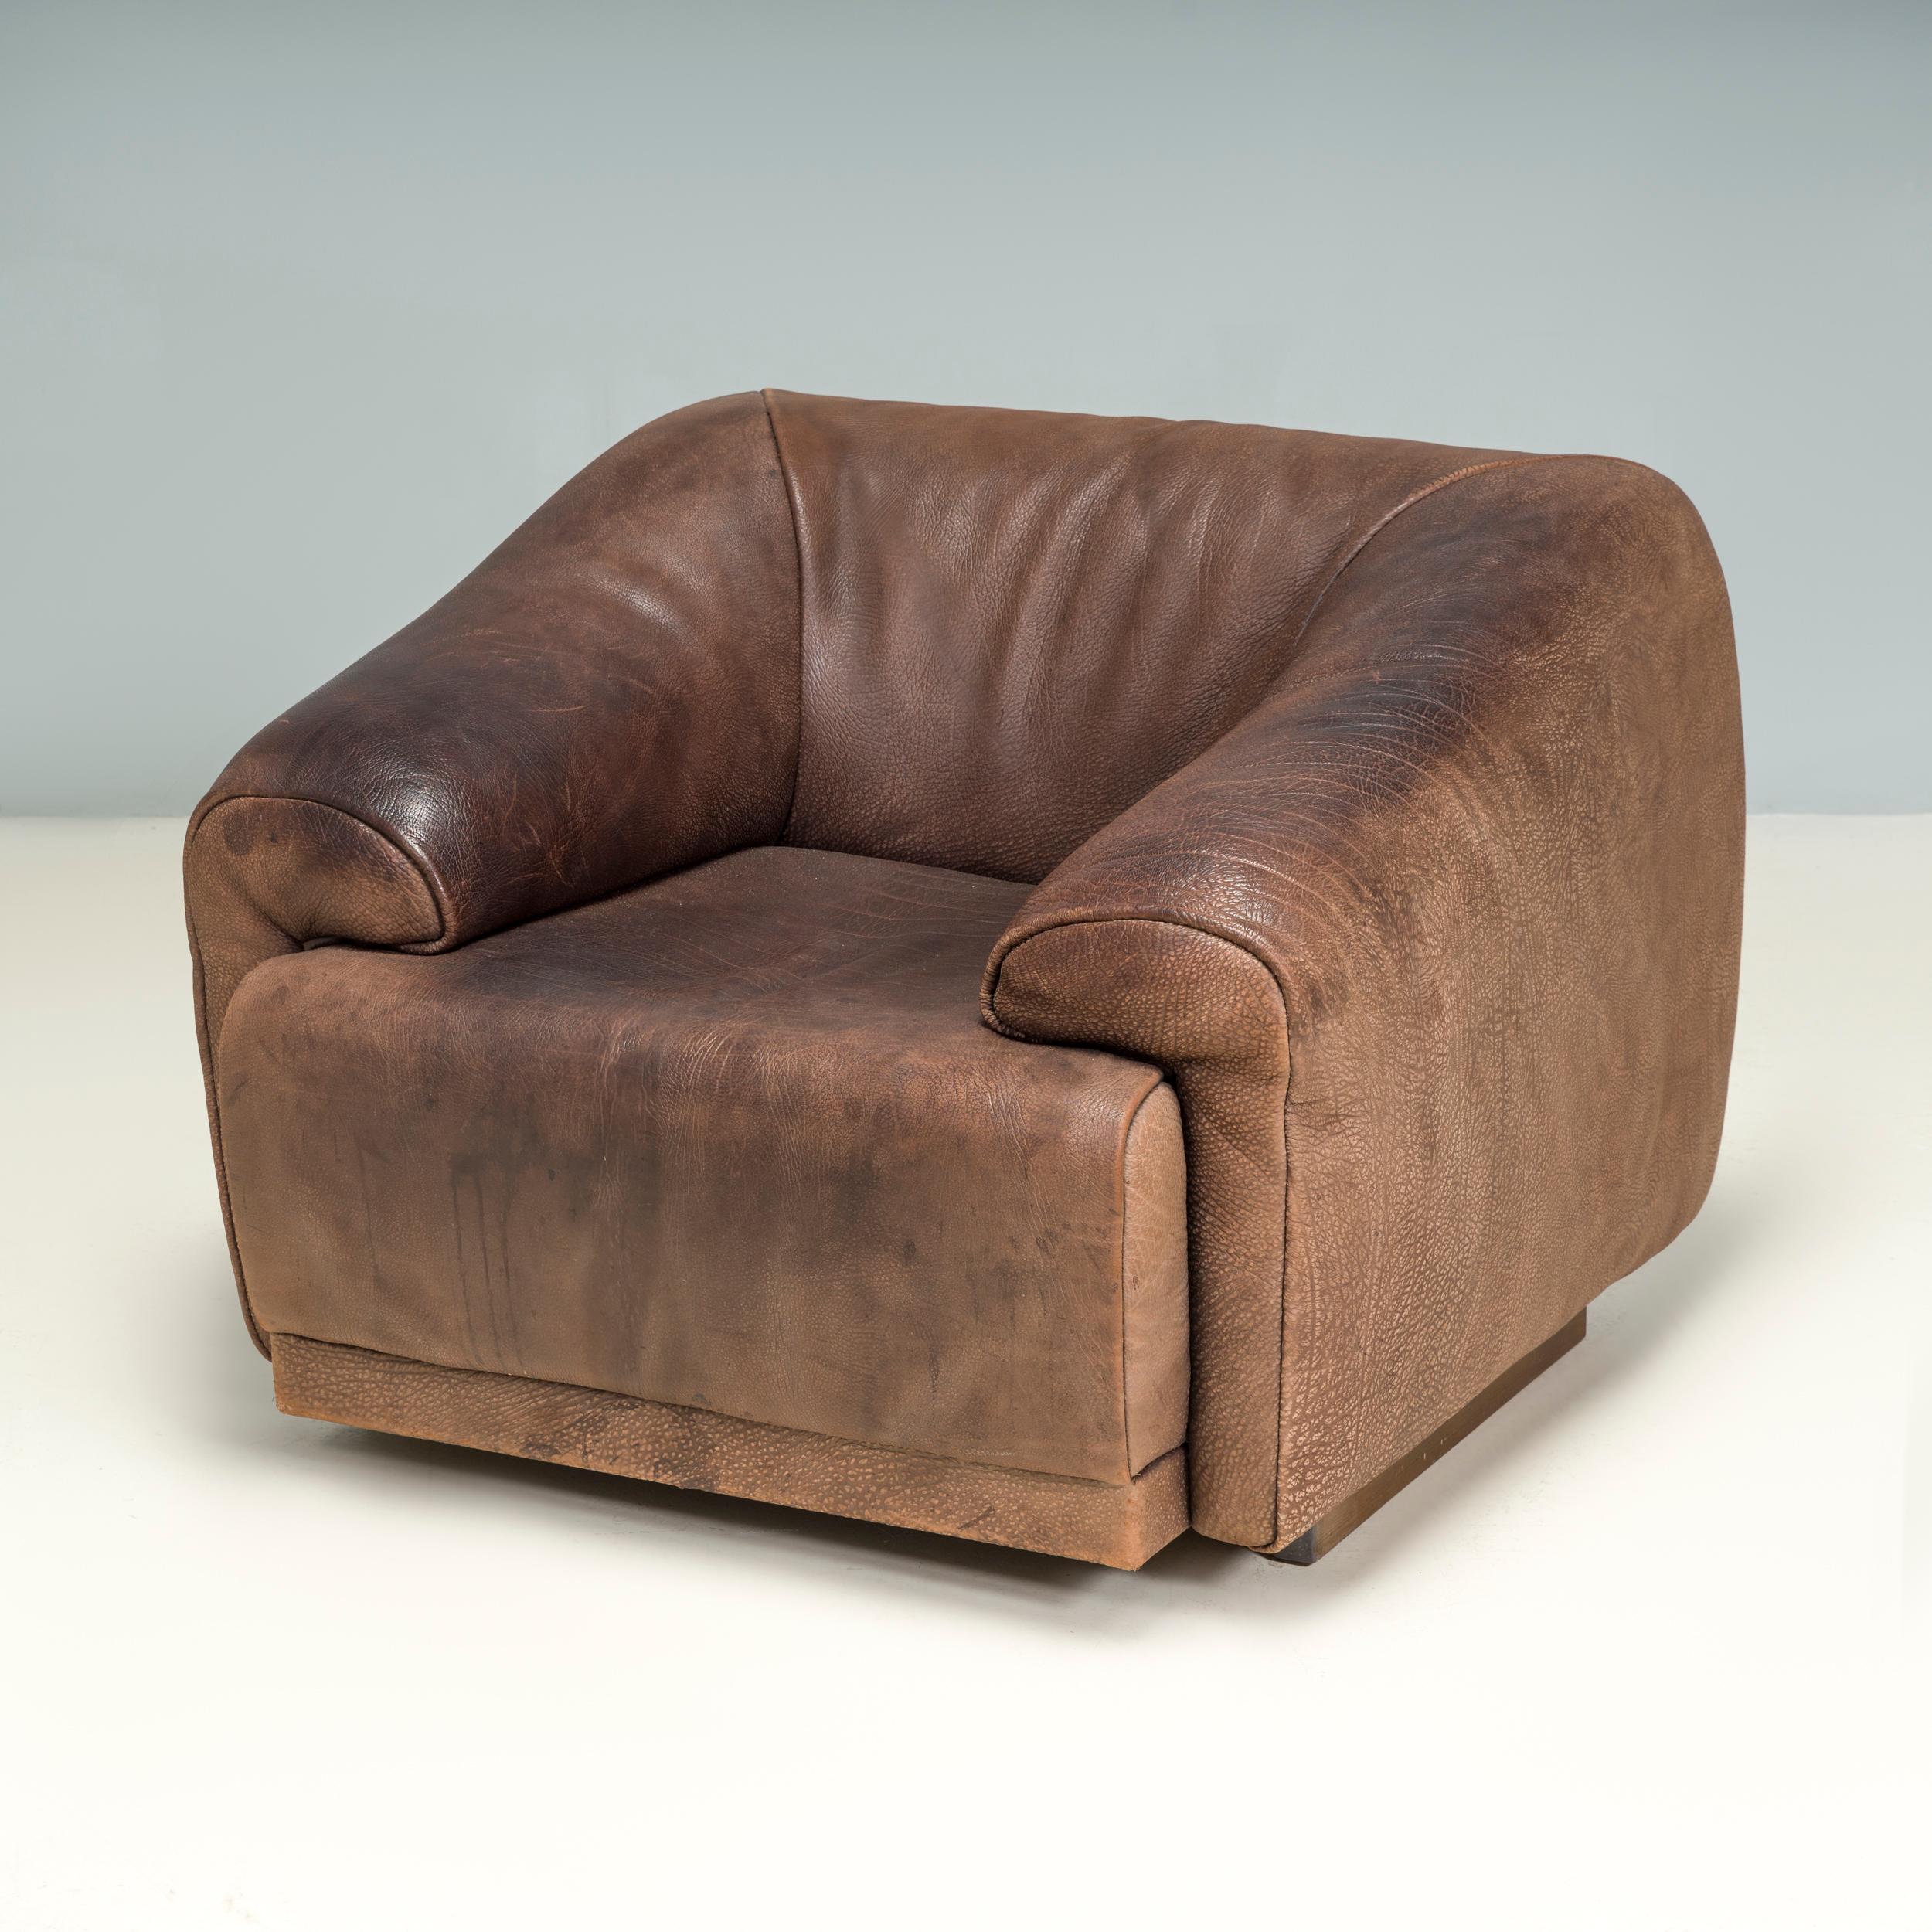 Founded in 1965, the De Sede furniture company has since become best known for their quality leather designs and iconic sofa and armchairs.

Fully upholstered in soft brown buffalo leather, this 1970s armchair has a boxy silhouette in a tuxedo